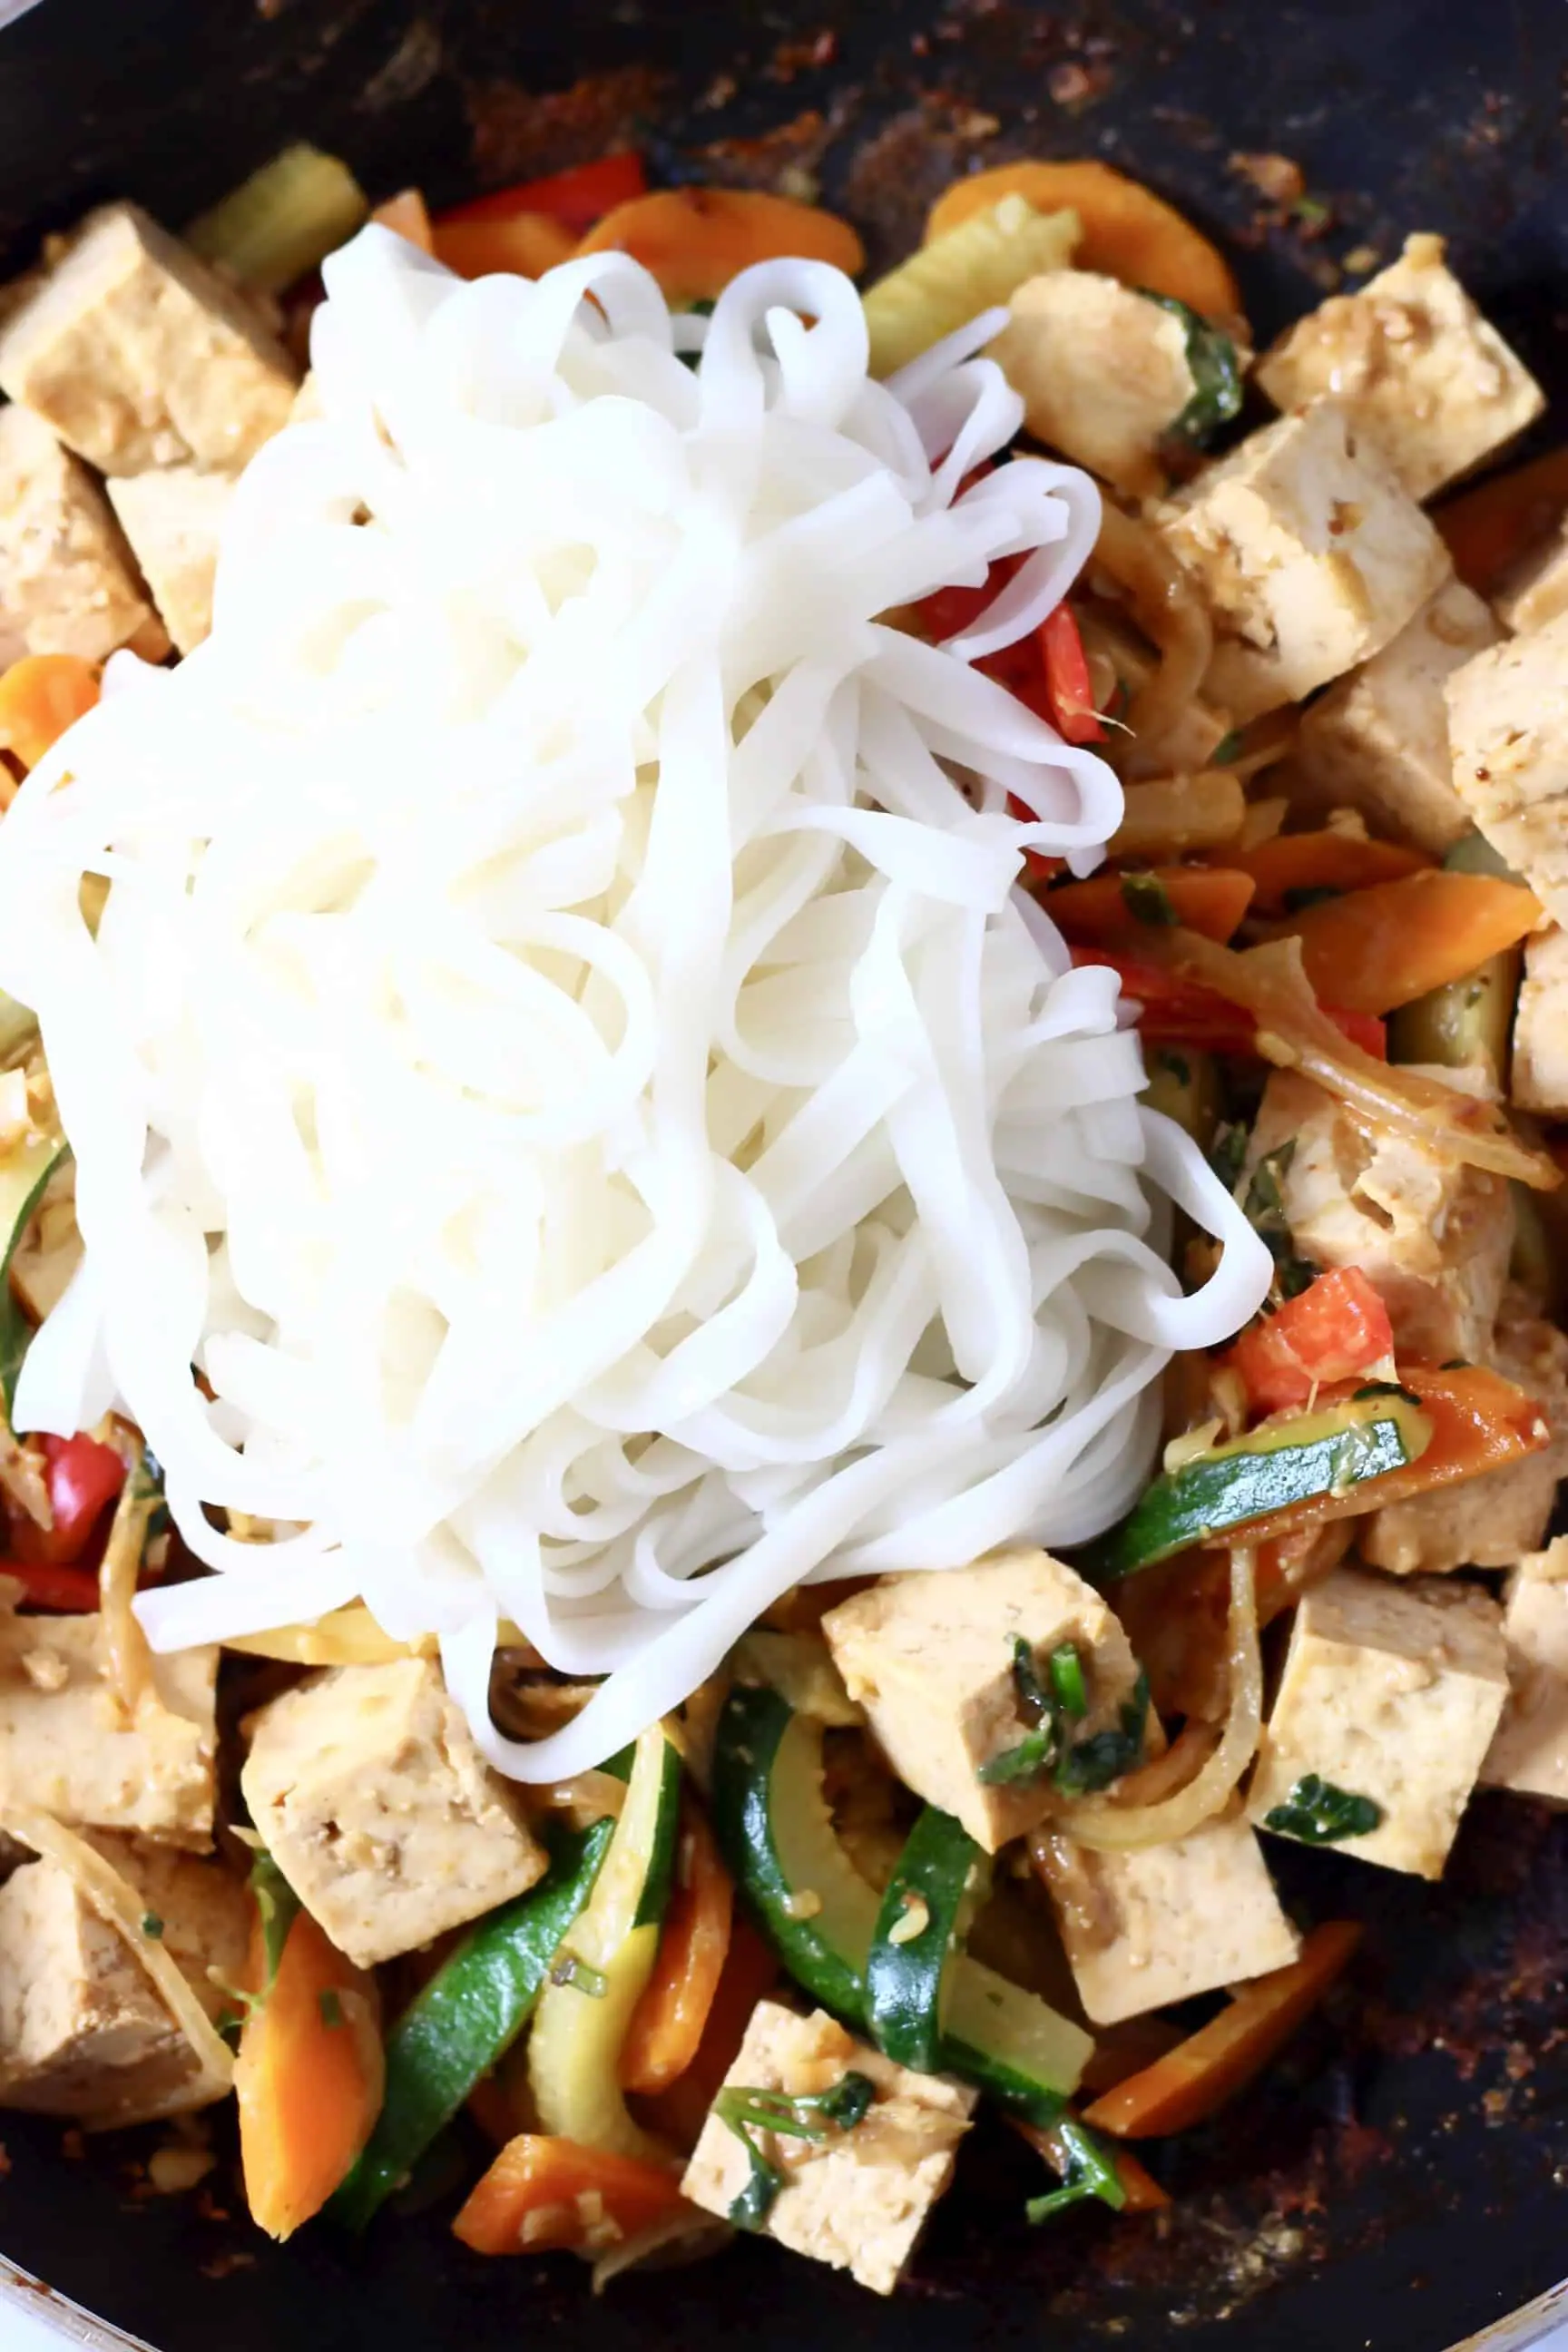 Chopped vegetables, tofu cubes and rice noodles in a frying pan